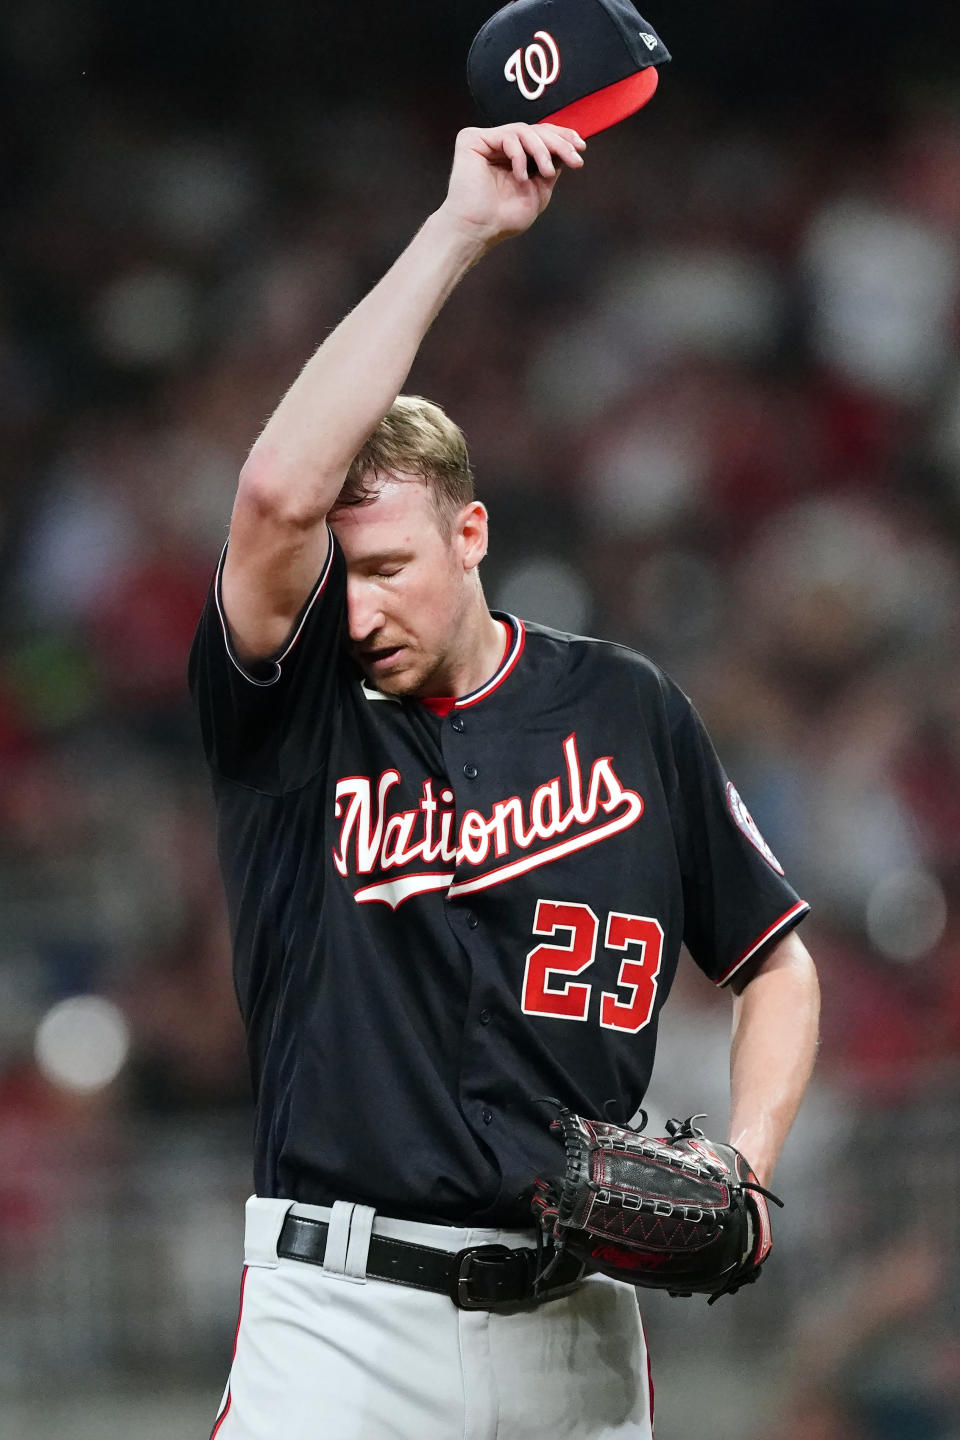 Washington Nationals pitcher Erick Fedde wipes his face as he waits for manager Dave Martinez to make his way to the mound for a pitching change in the fifth inning of a baseball game against the Atlanta Braves, Friday, Aug. 6, 2021, in Atlanta. (AP Photo/John Bazemore)